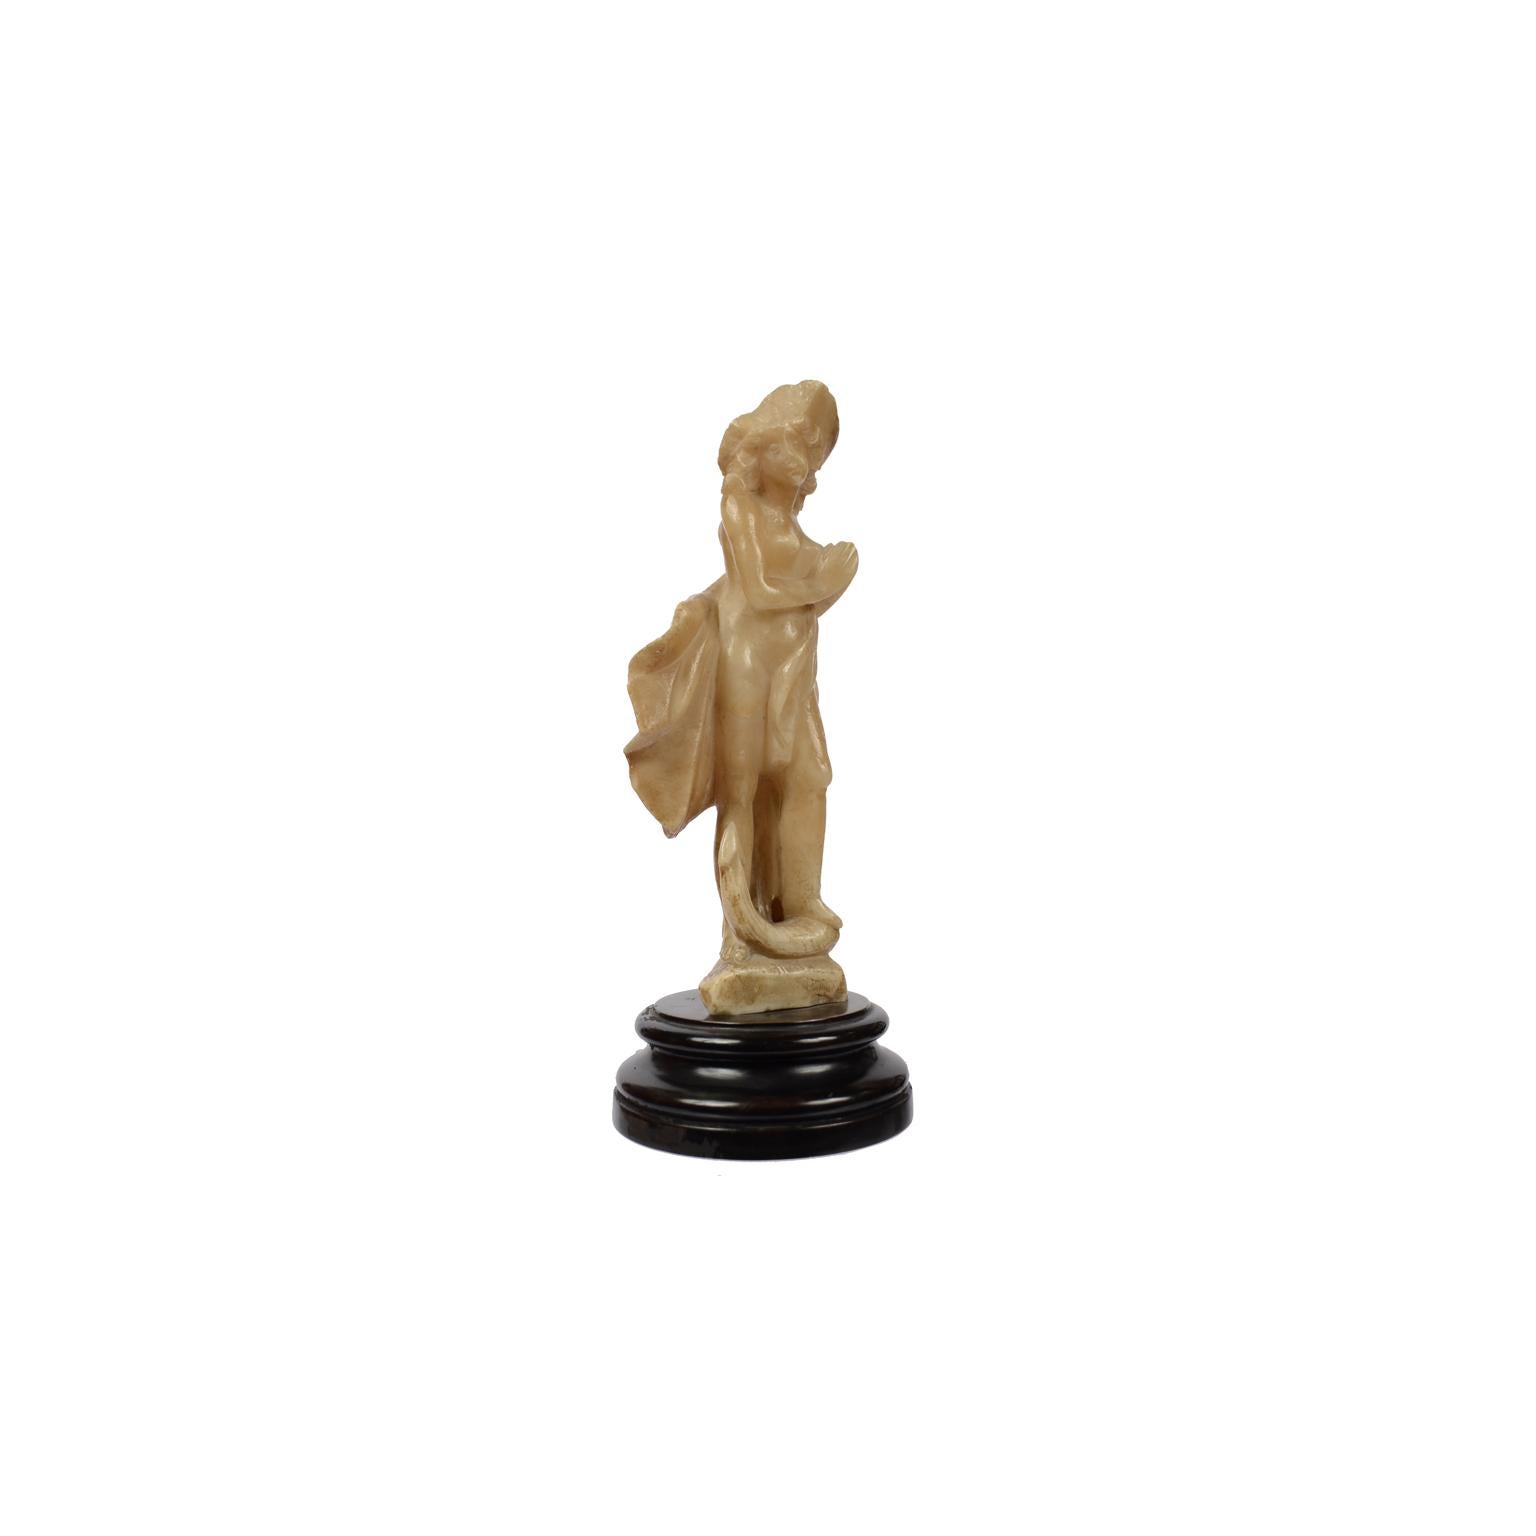 Mid-18th Century French Alabaster Sculpture Depicting a Female Nude with Anchor  For Sale 2